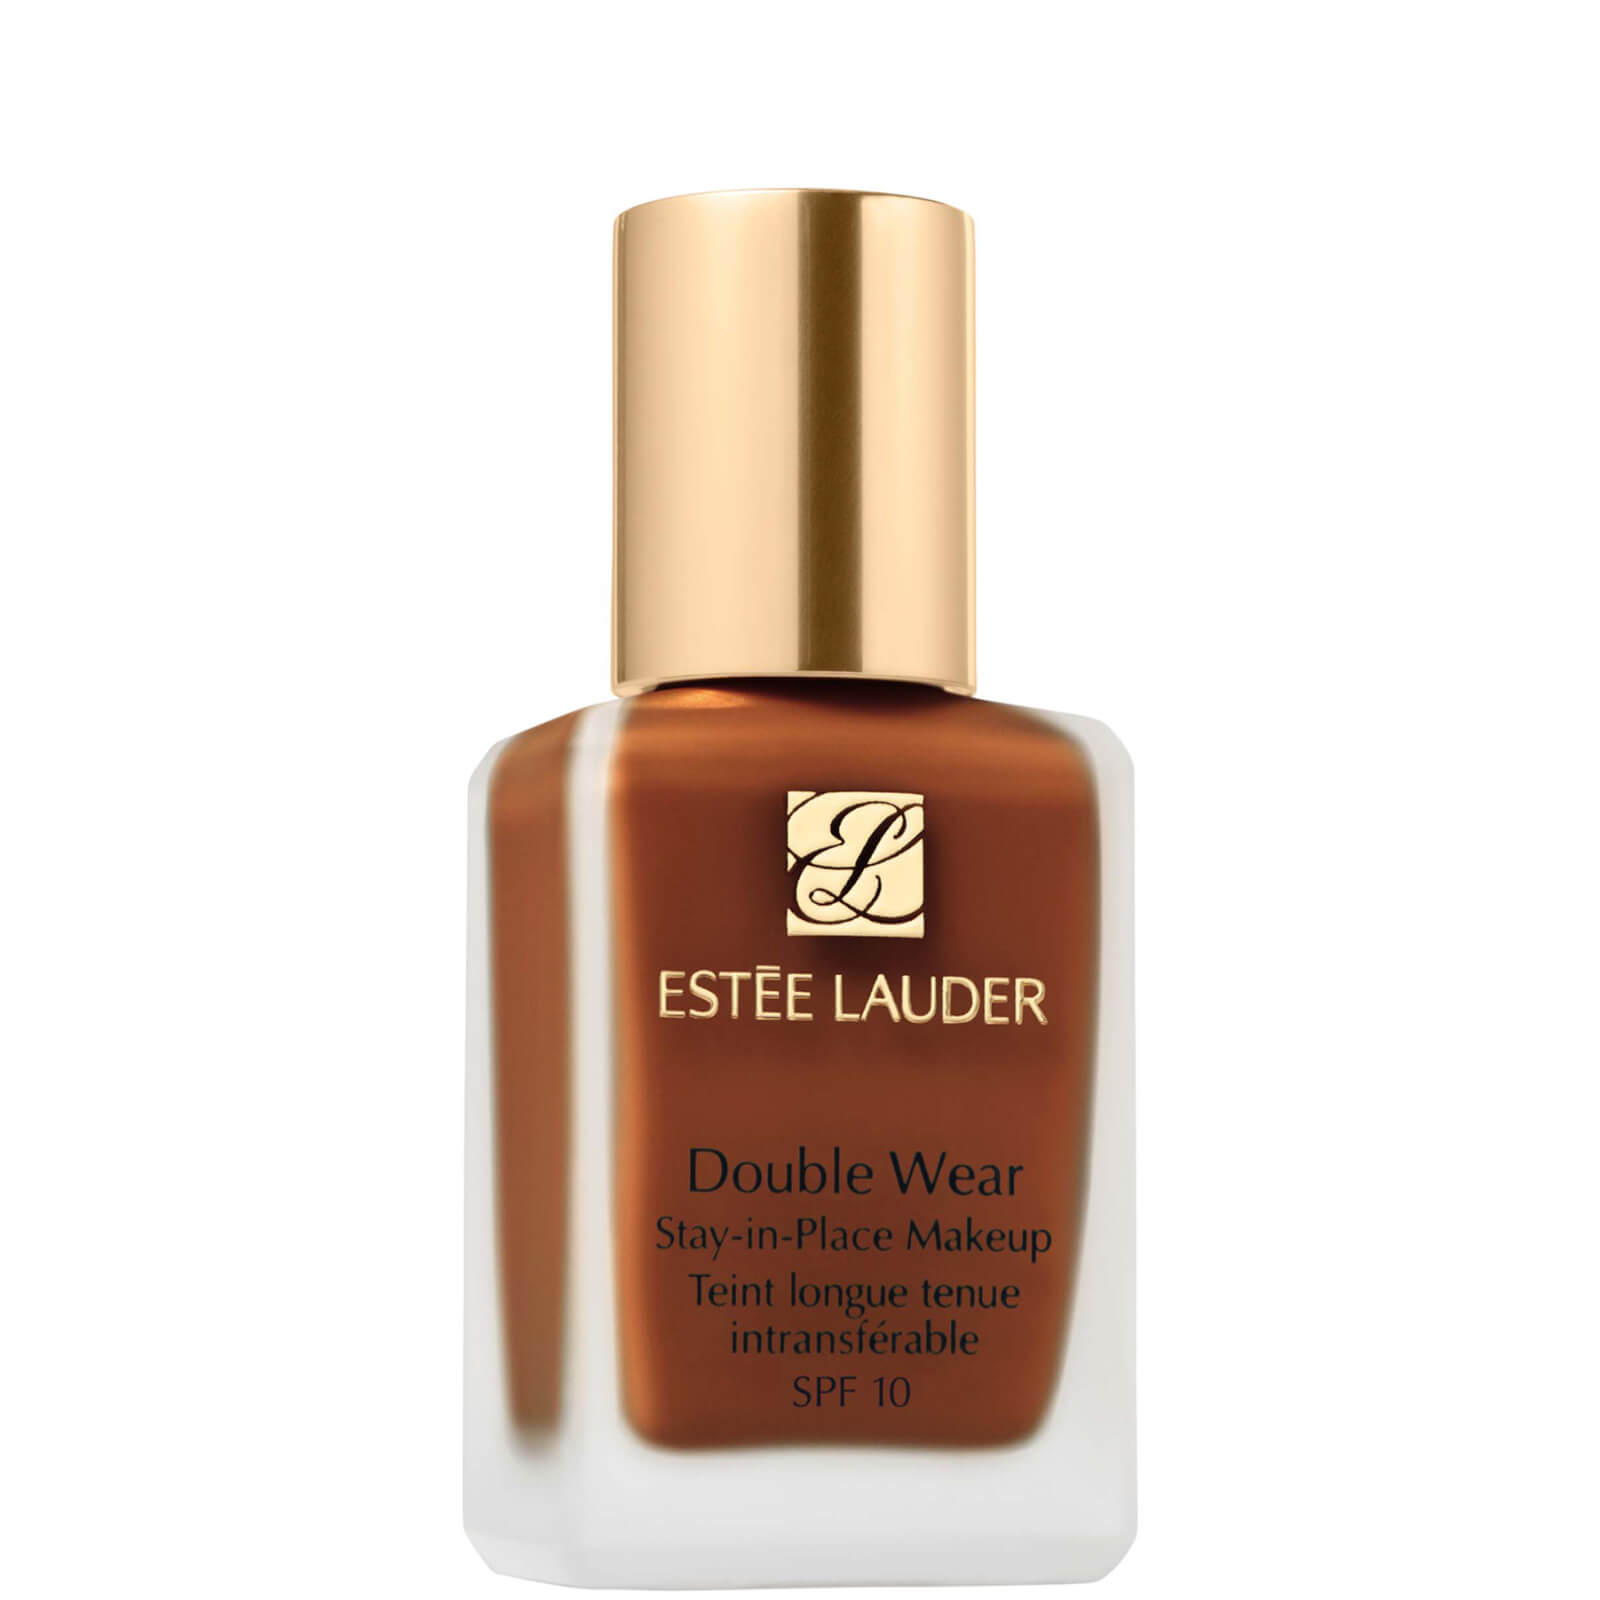 Estée Lauder Double Wear Stay-In-Place Makeup 30ml (Various Shades) - 5N2 Amber Honey